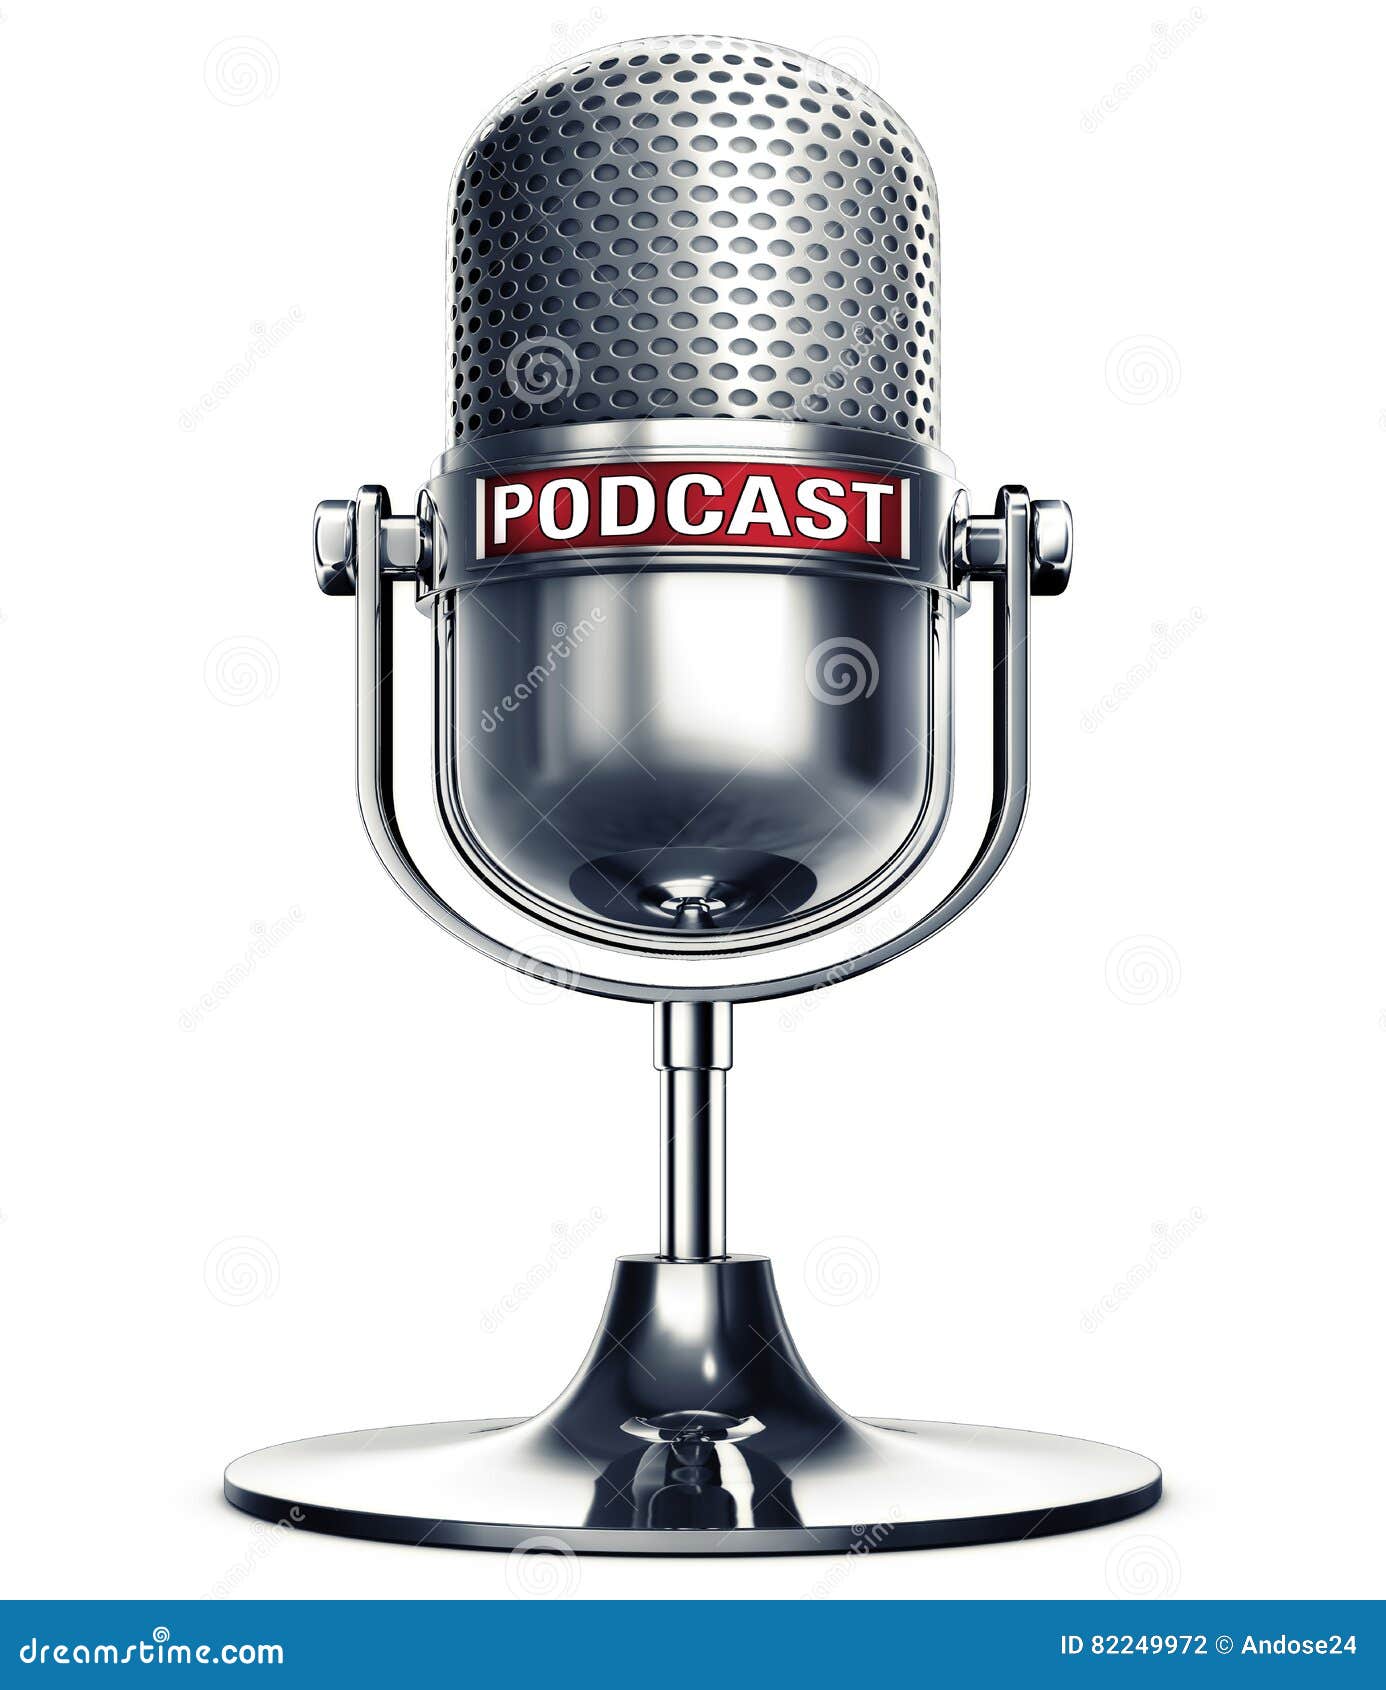 Podcast stock photo. Image of microphone, podcast, subscription - 82249972